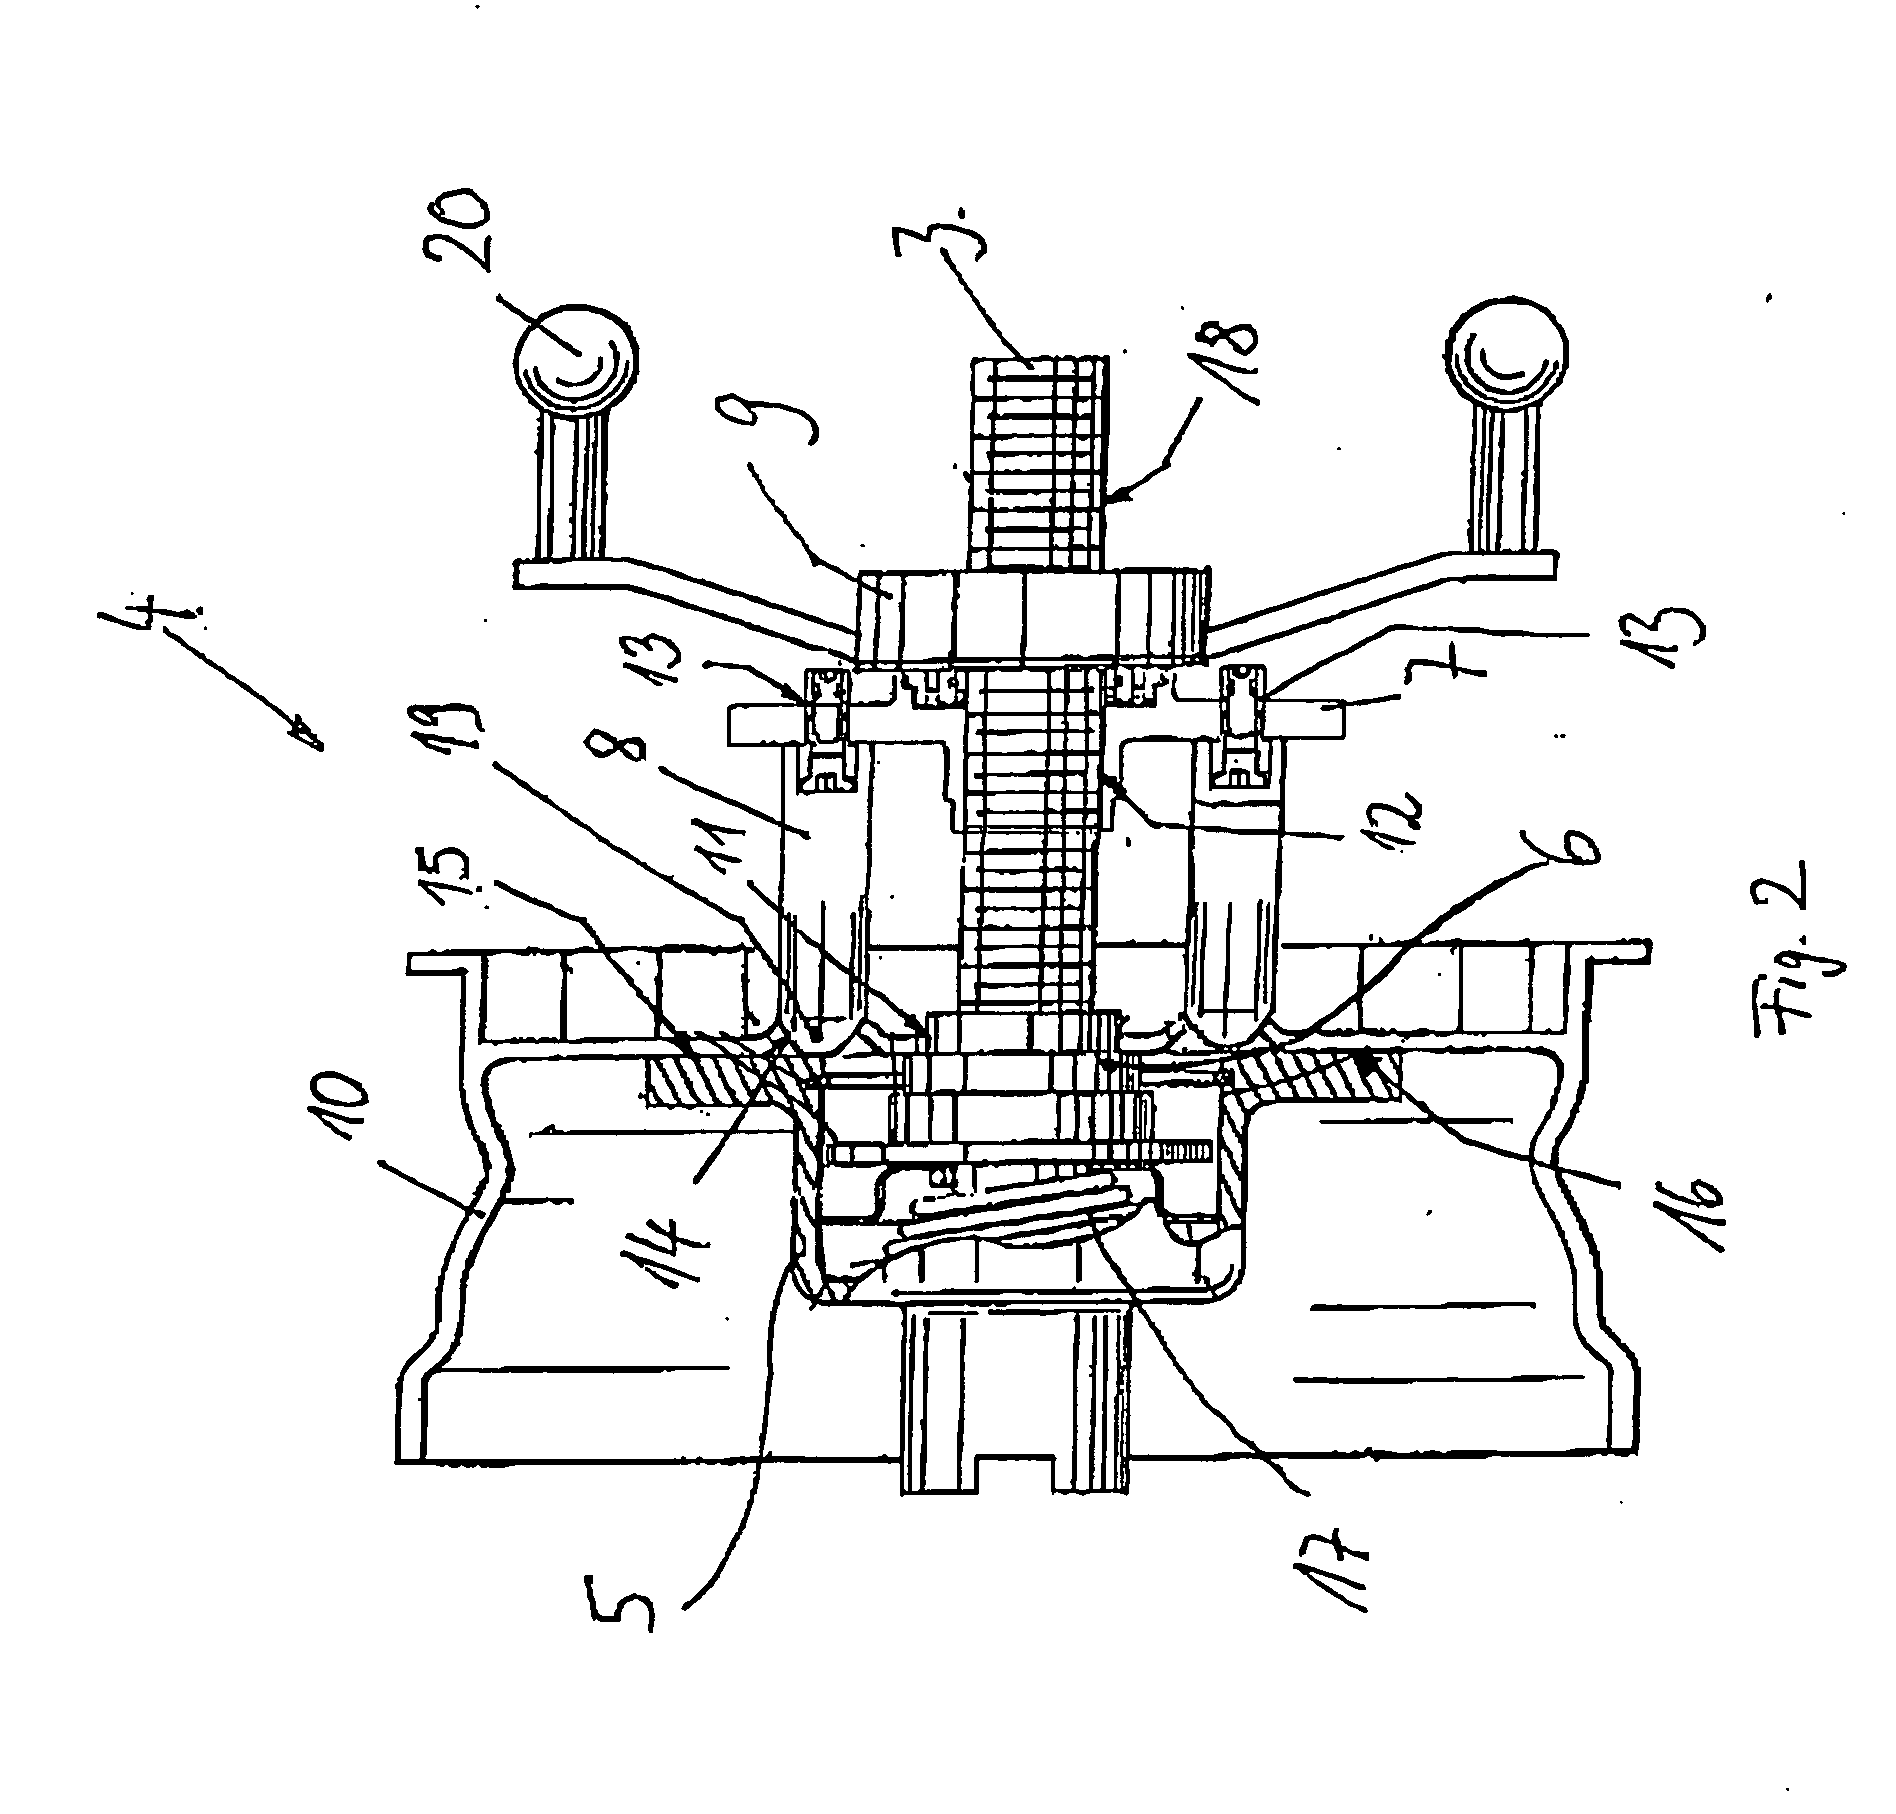 Balancing machine with a clamping device